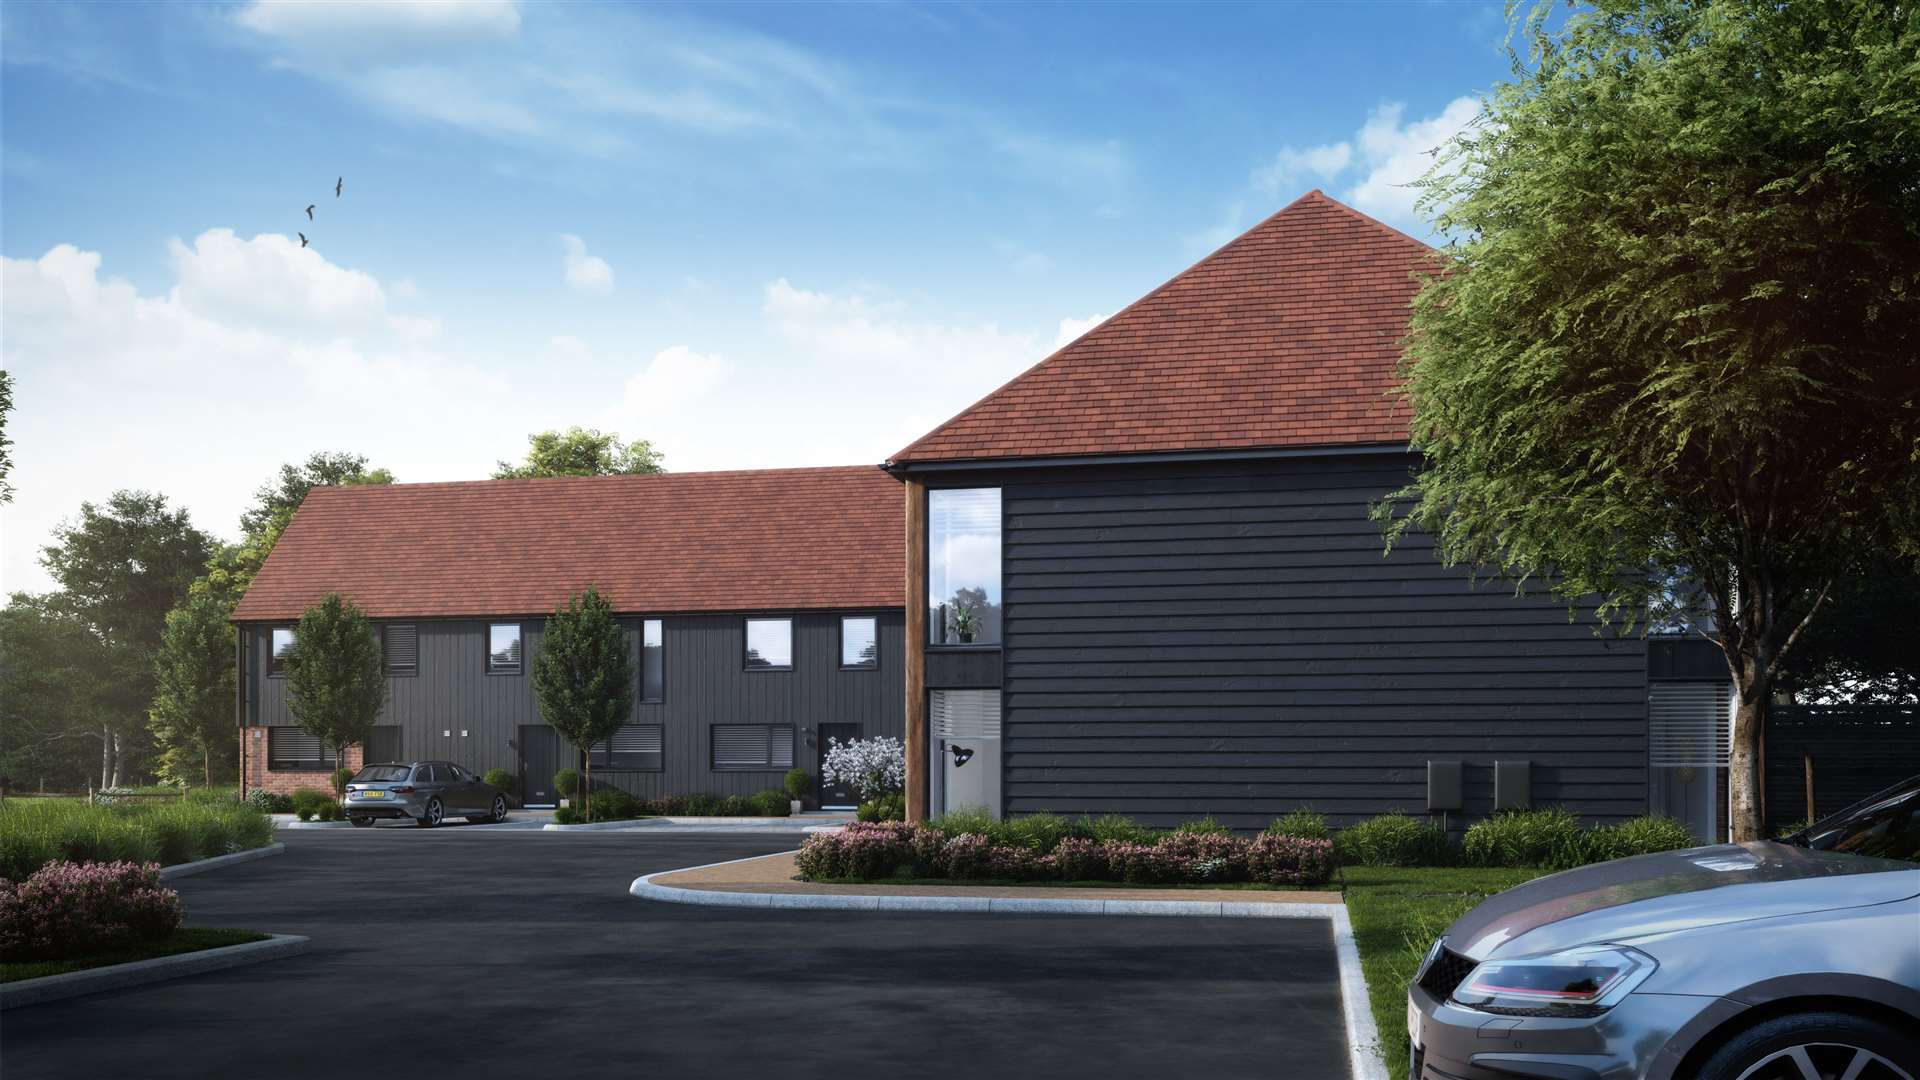 The homes at Stonegate are built to tomorrow’s standards and a wise investment in a greener future